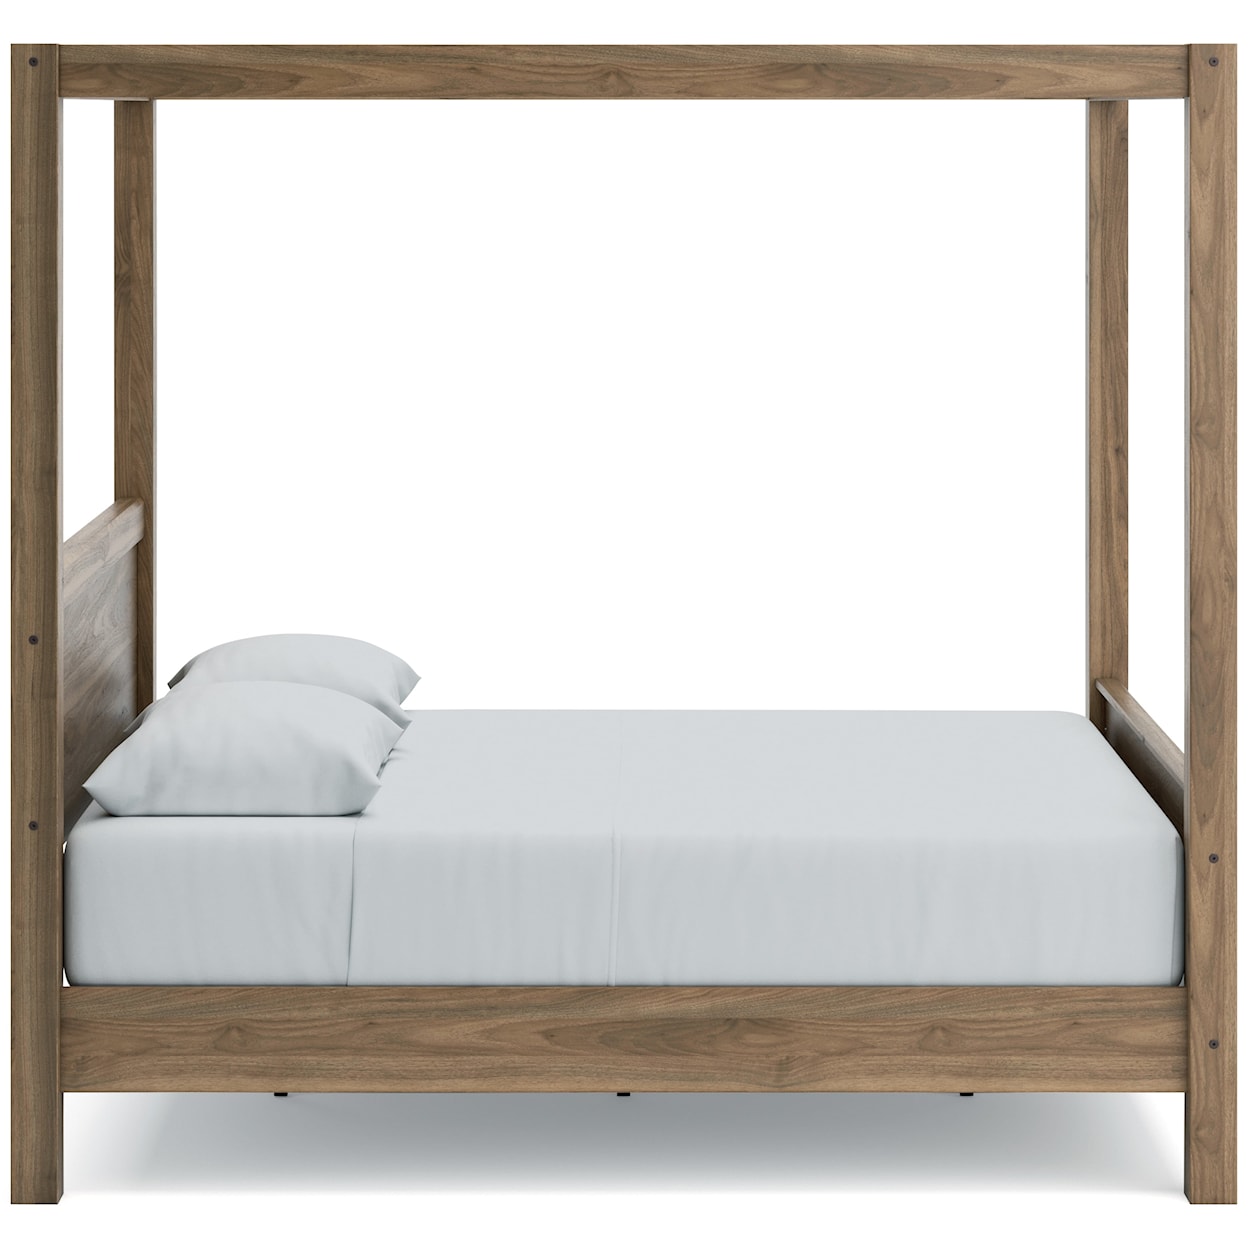 Signature Design by Ashley Furniture Aprilyn Queen Canopy Bed